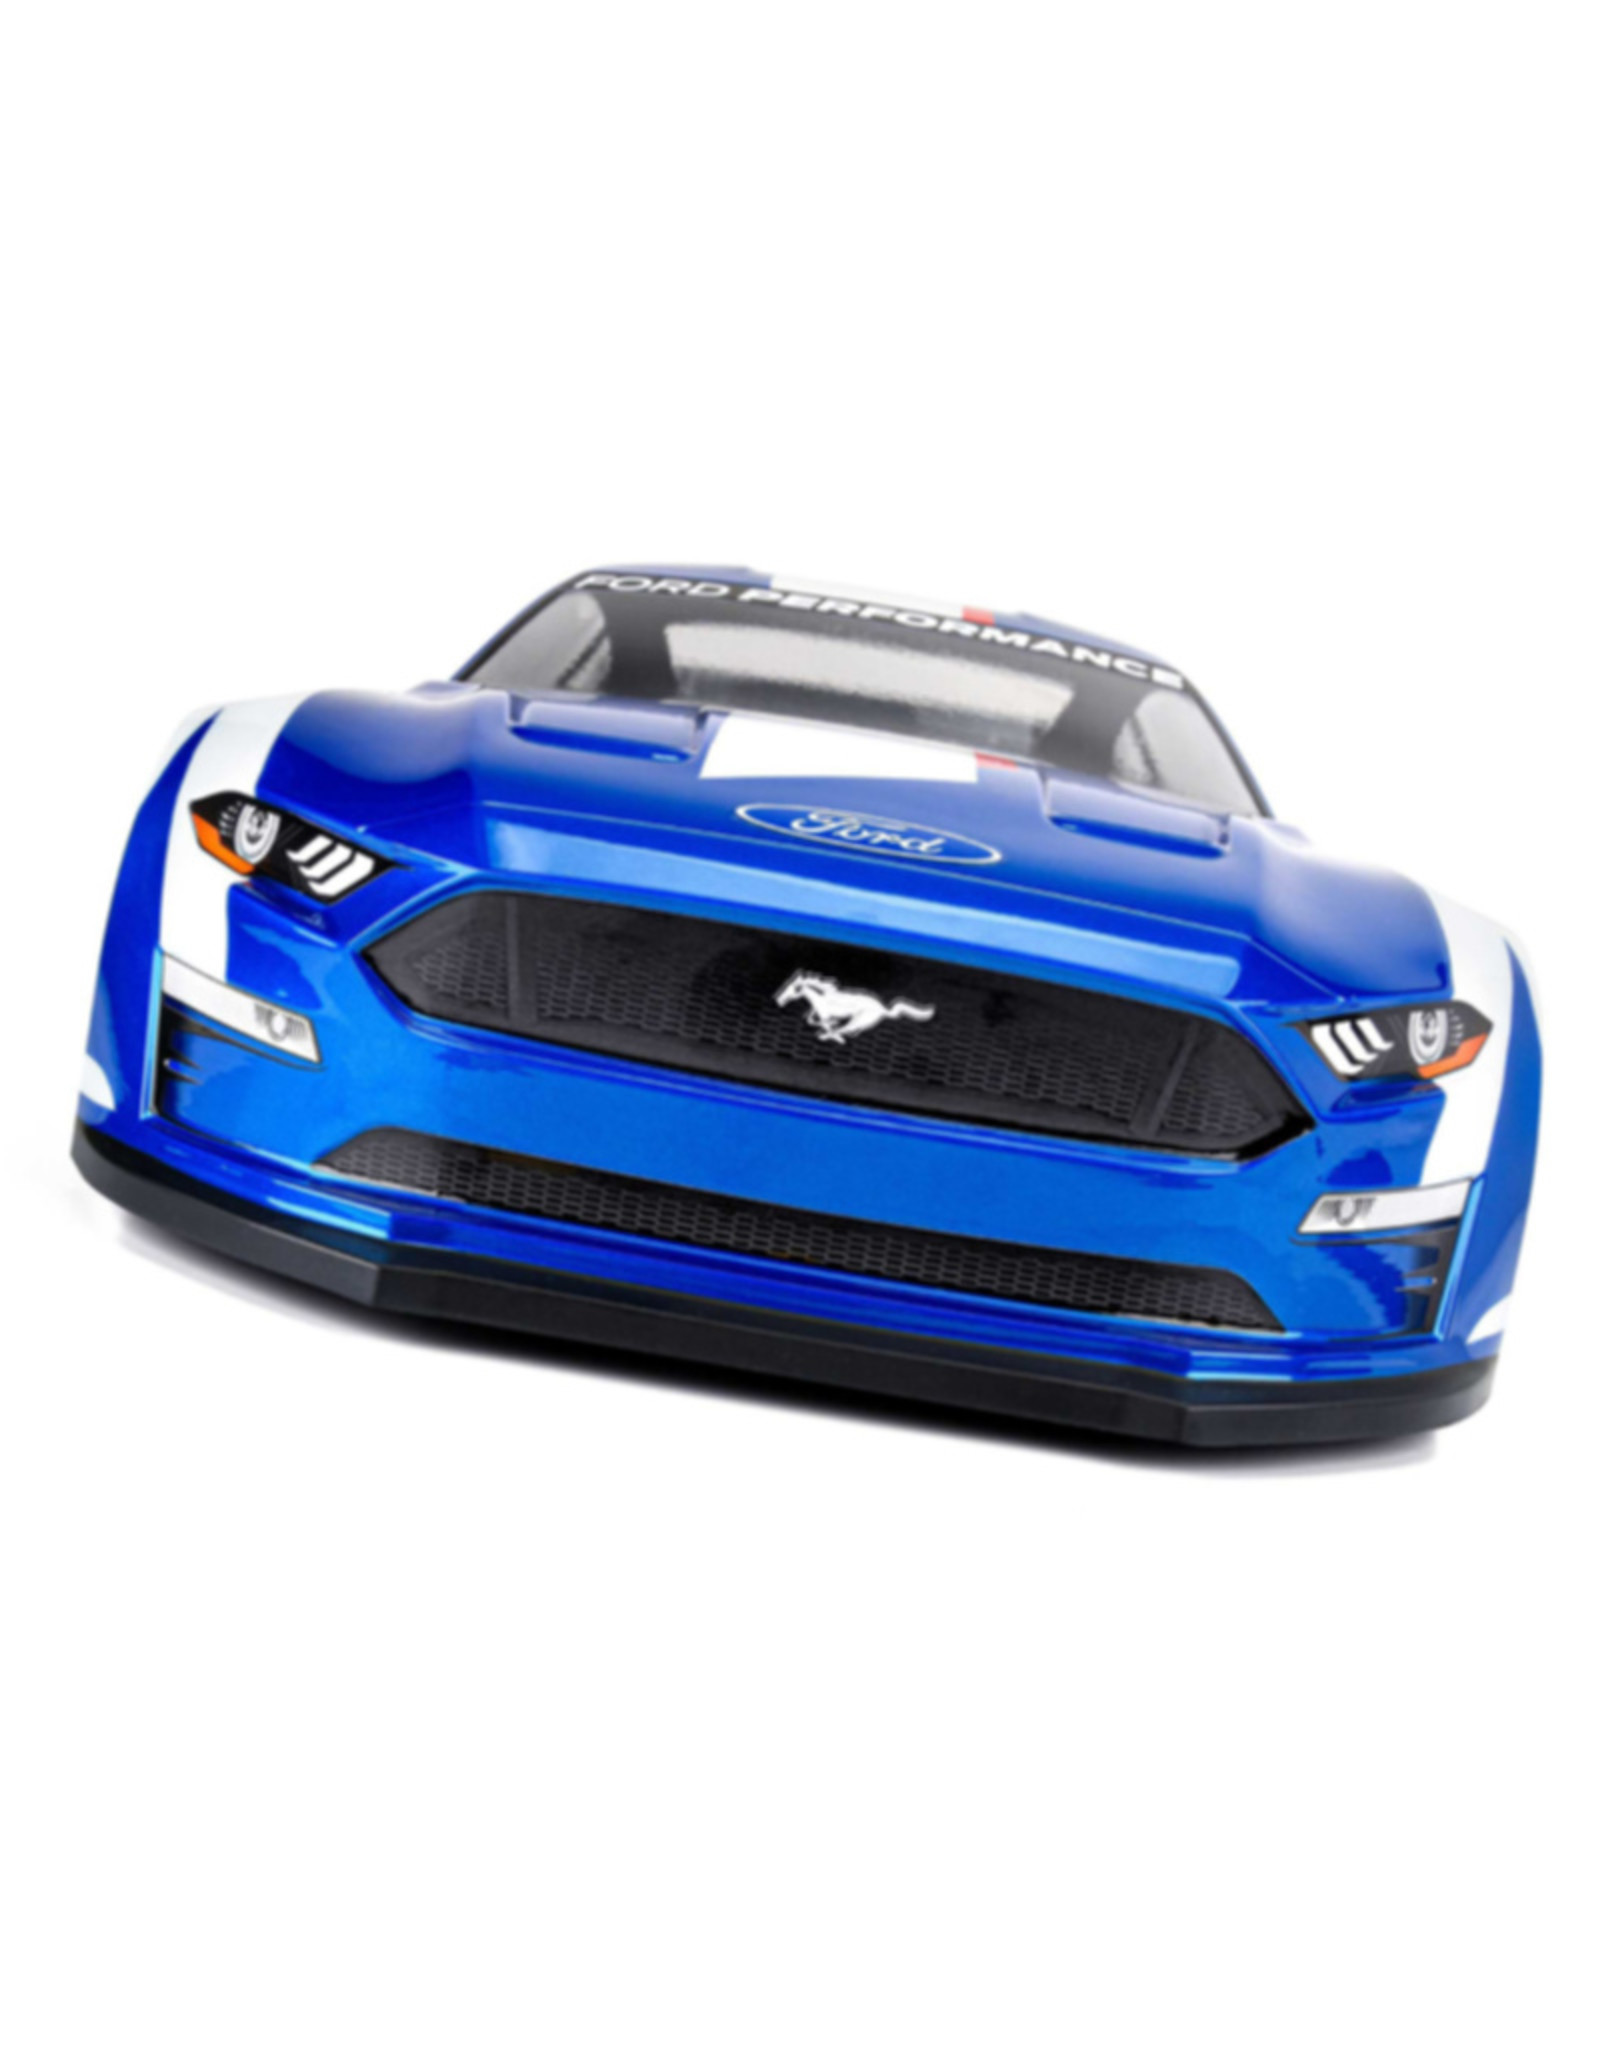 Protoform PRM158200		1/8 2021 Ford Mustang Clear Body: Vendetta